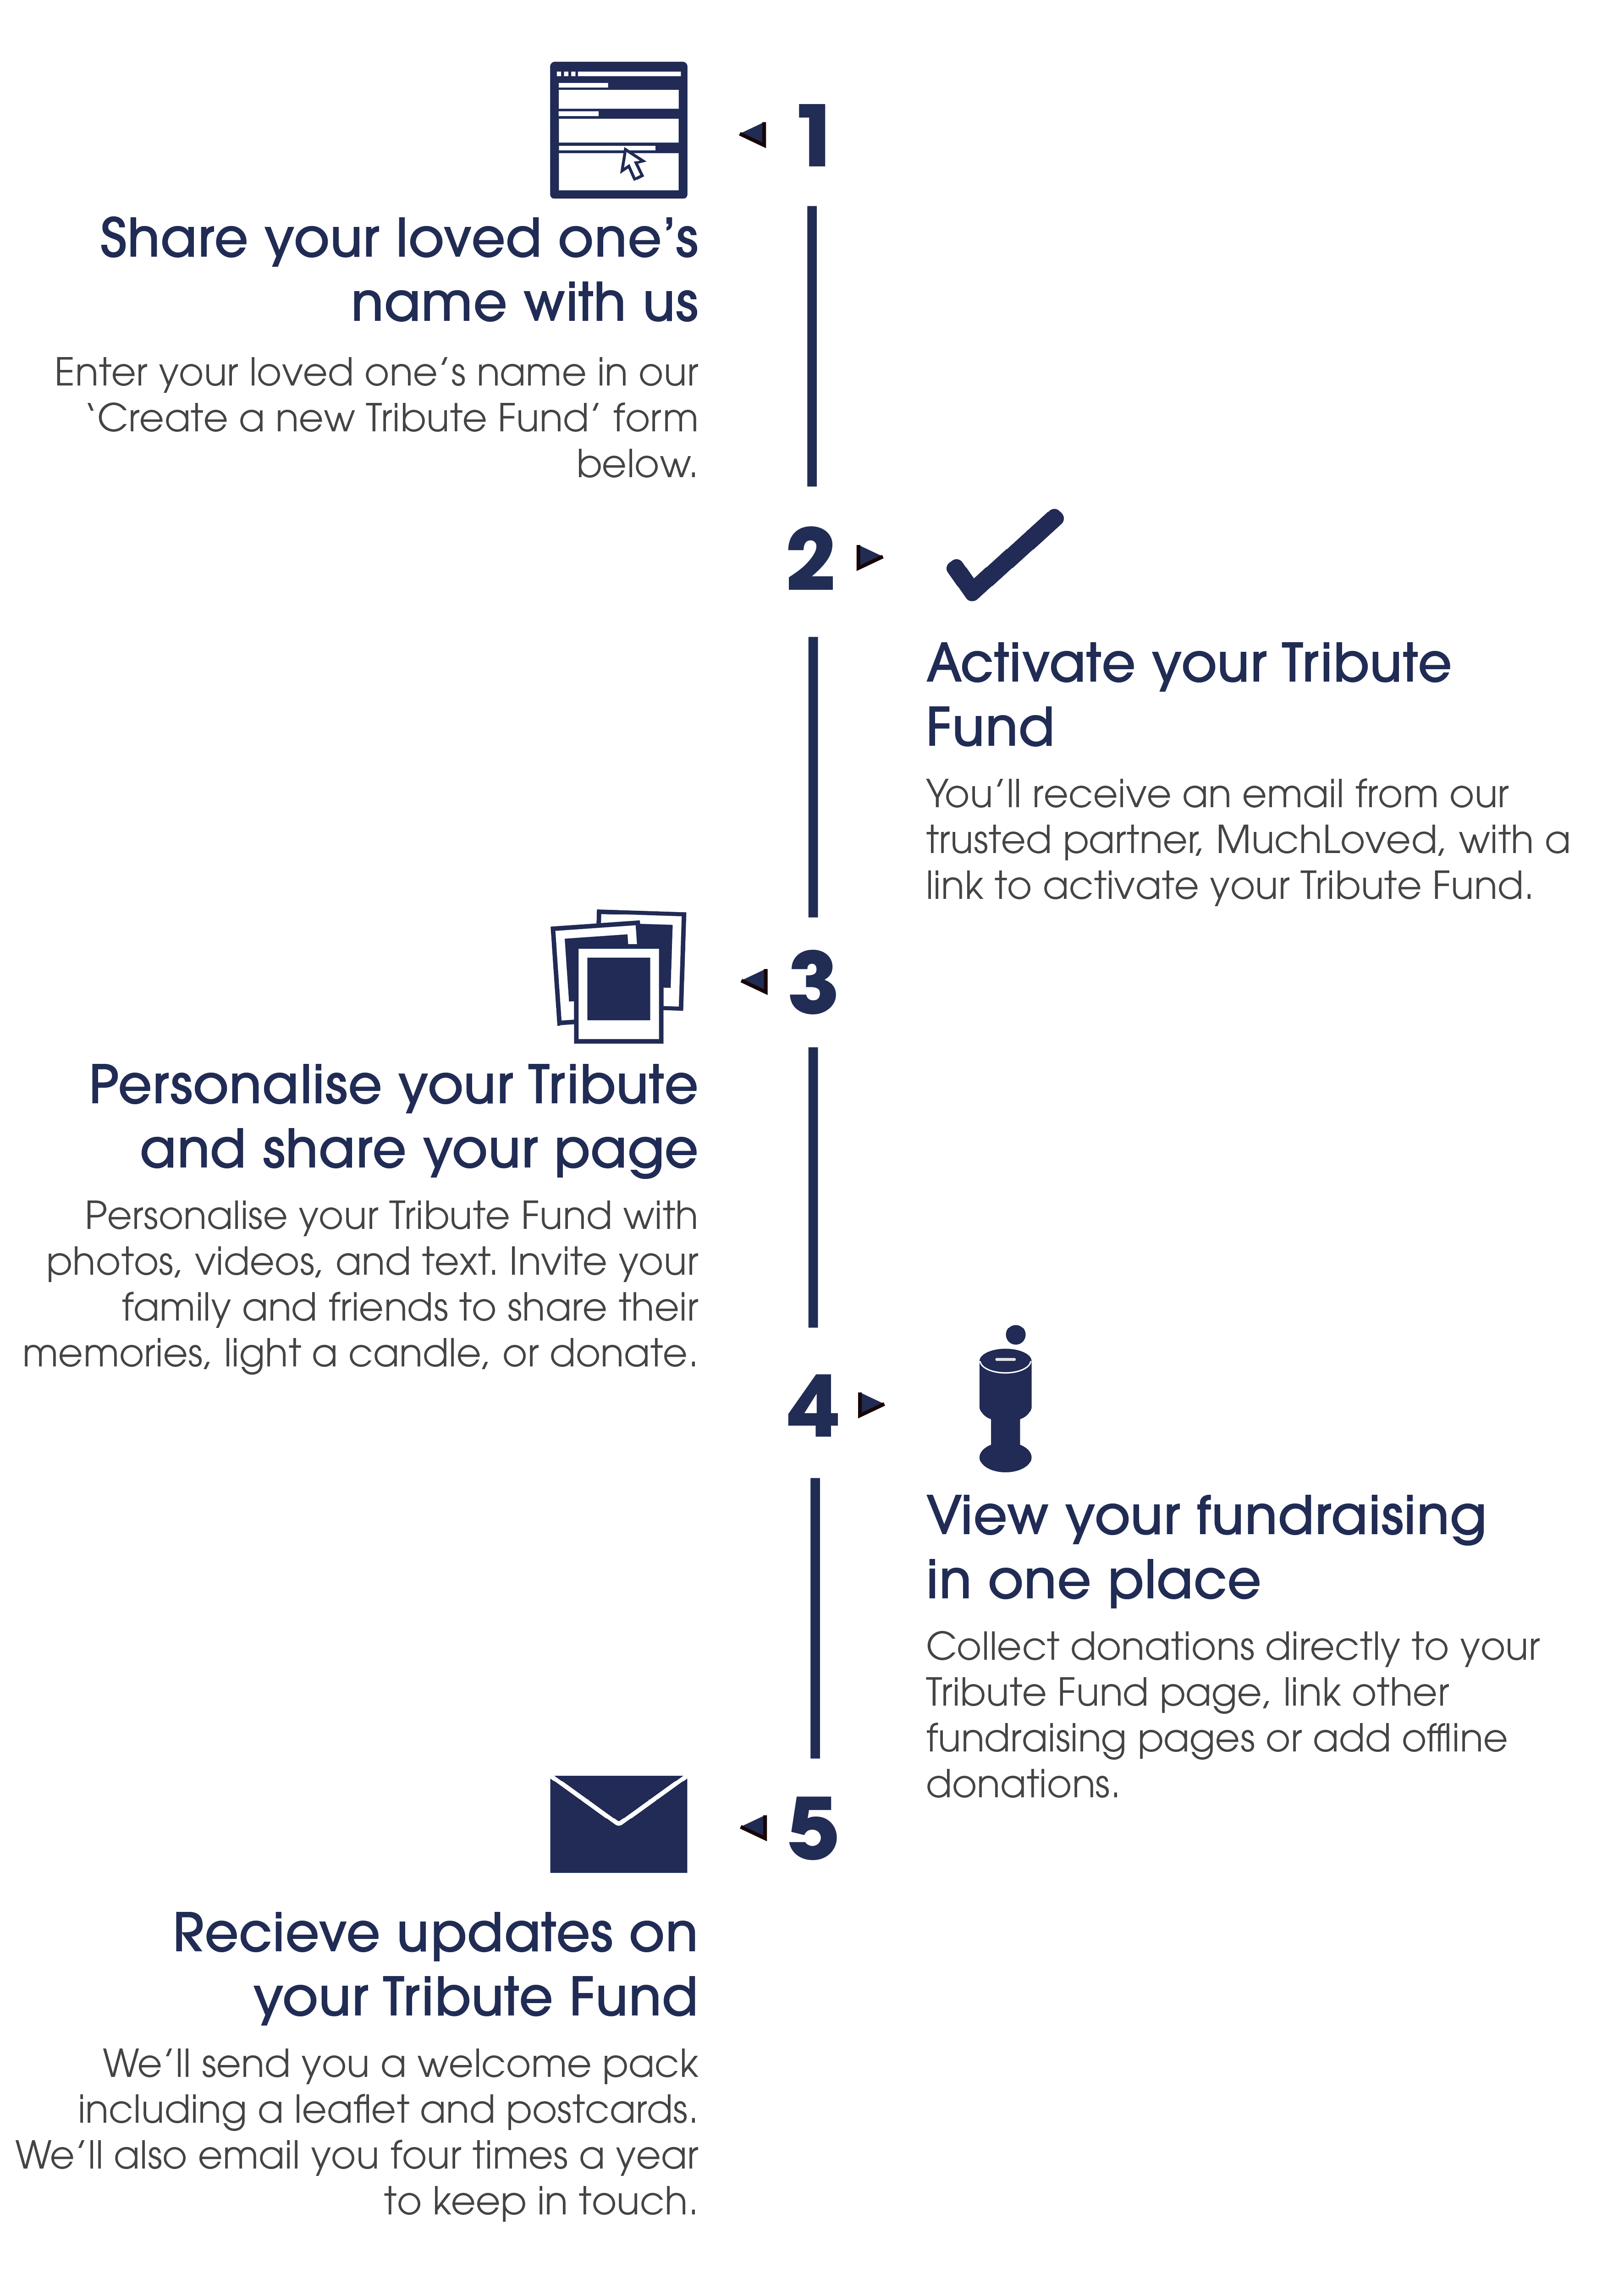 Step by step guide to how Tribute Funds work. Step one share your loved ones name with us. Step two activate your Tribute Fund. Step three personalise your tribute and share your page. Step four view your fundraising in one place. Step give receive updates on your Tribute Fund.